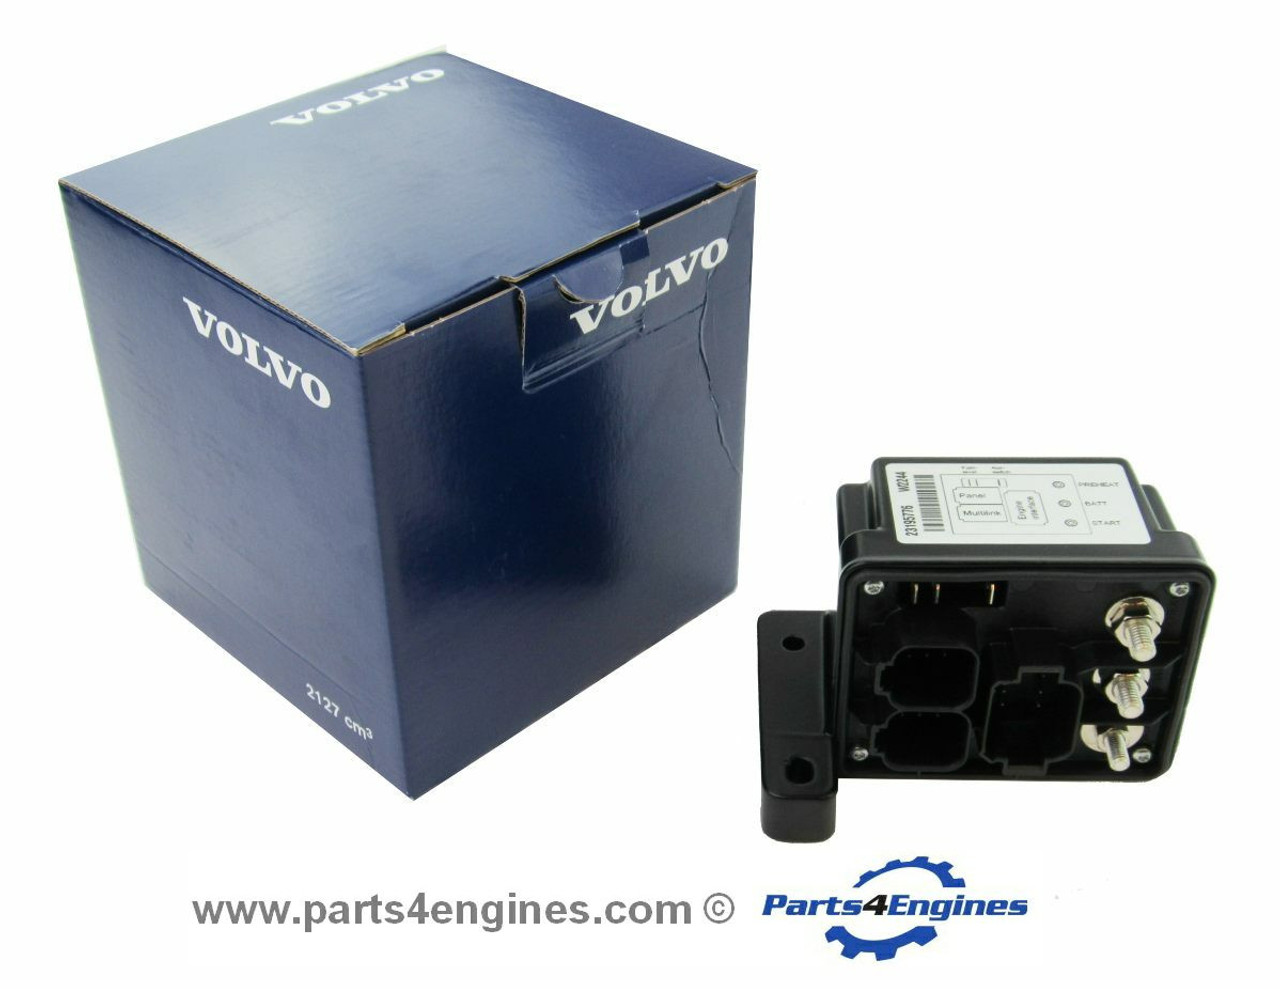 Volvo Penta D1-13 MDI Electronic control unit, from parts4engines.com